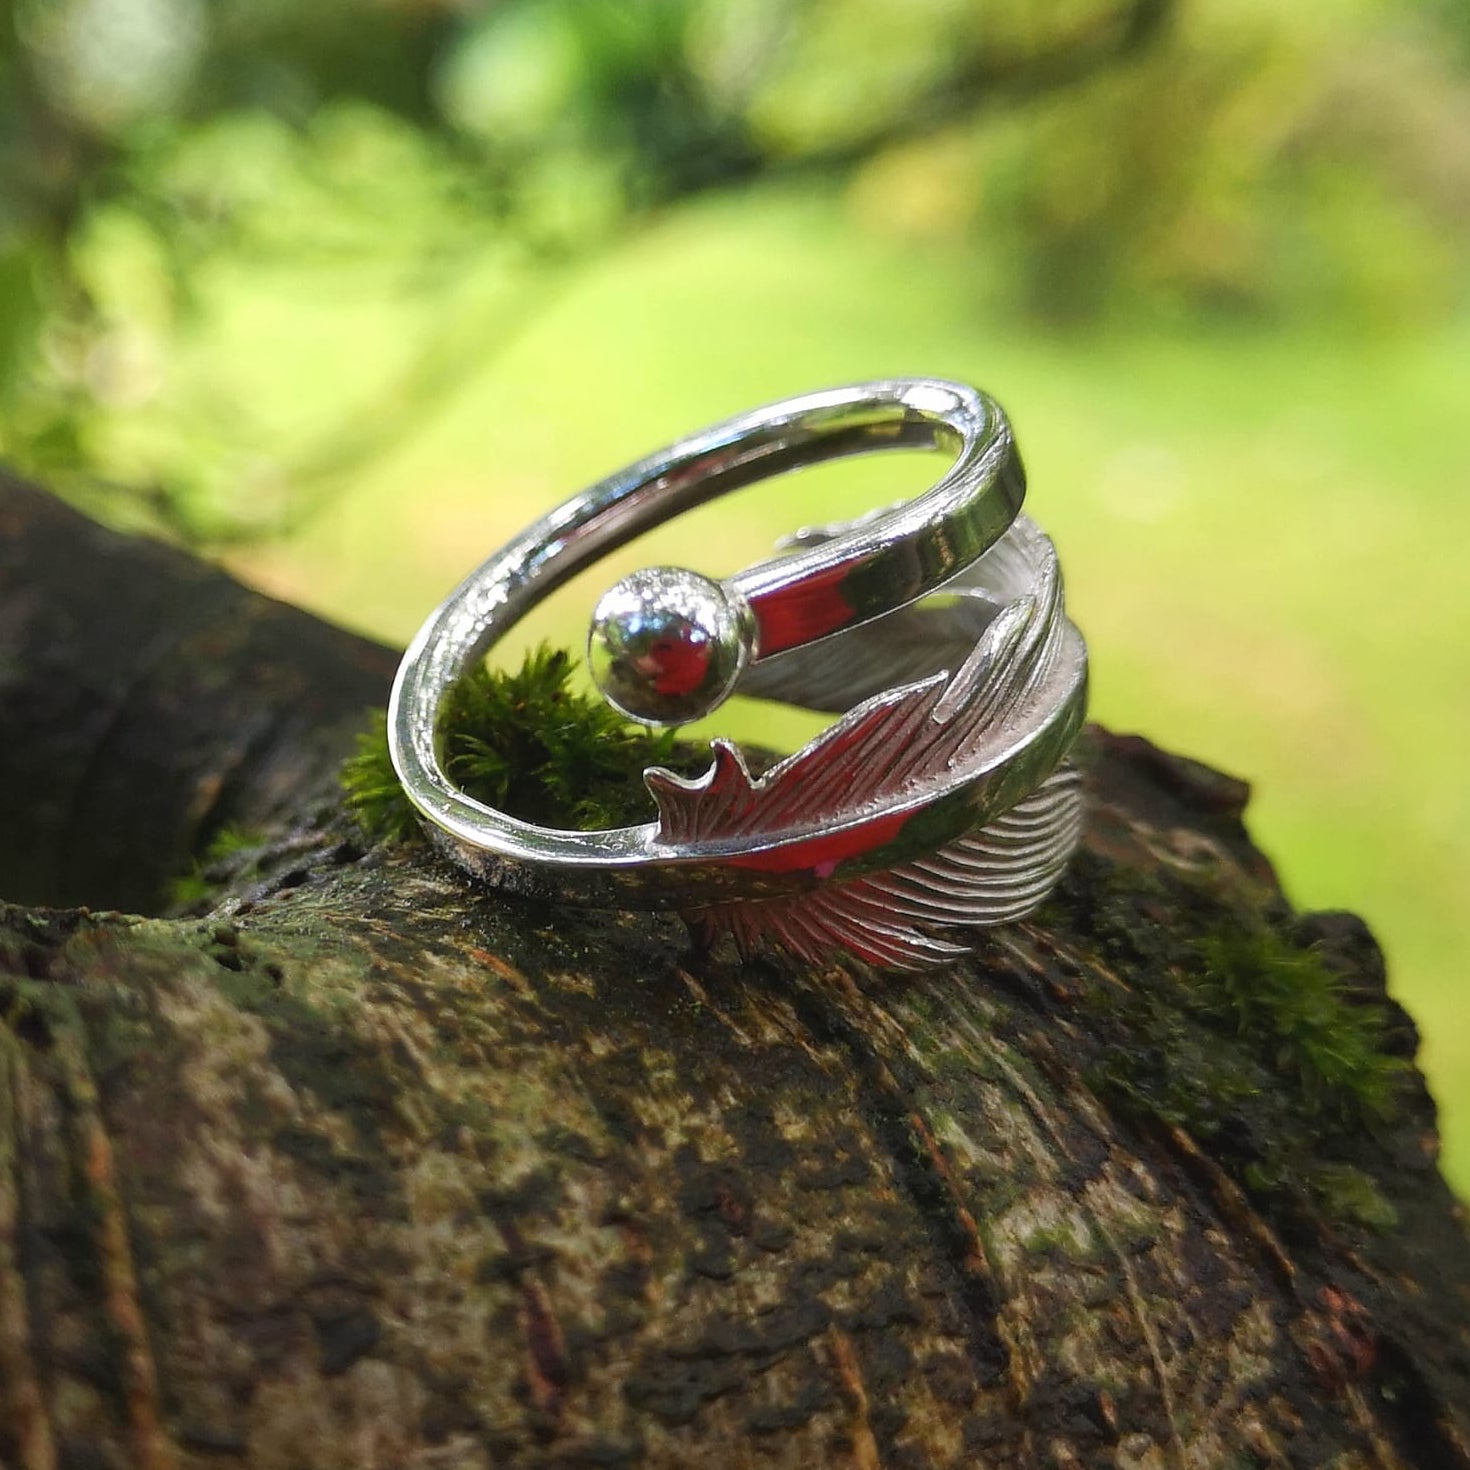 Earth Angel Feather Ring handcrafted in sterling silver by Elena Brennan Jewellery, photographed in a nature setting